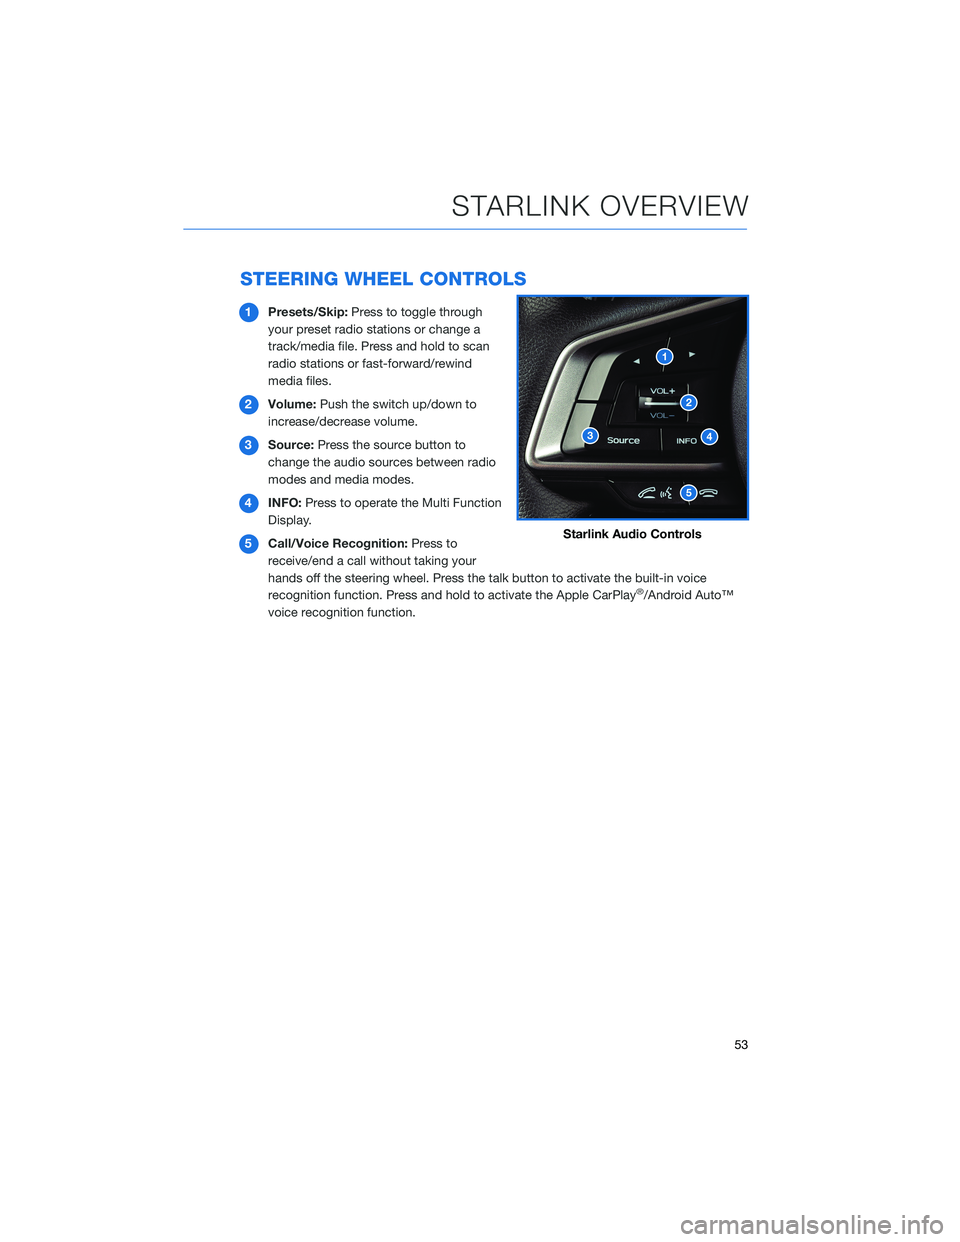 SUBARU CROSSTREK 2022  Getting Started Guide STEERING WHEEL CONTROLS
1Presets/Skip:Press to toggle through
your preset radio stations or change a
track/media file. Press and hold to scan
radio stations or fast-forward/rewind
media files.
2Volume